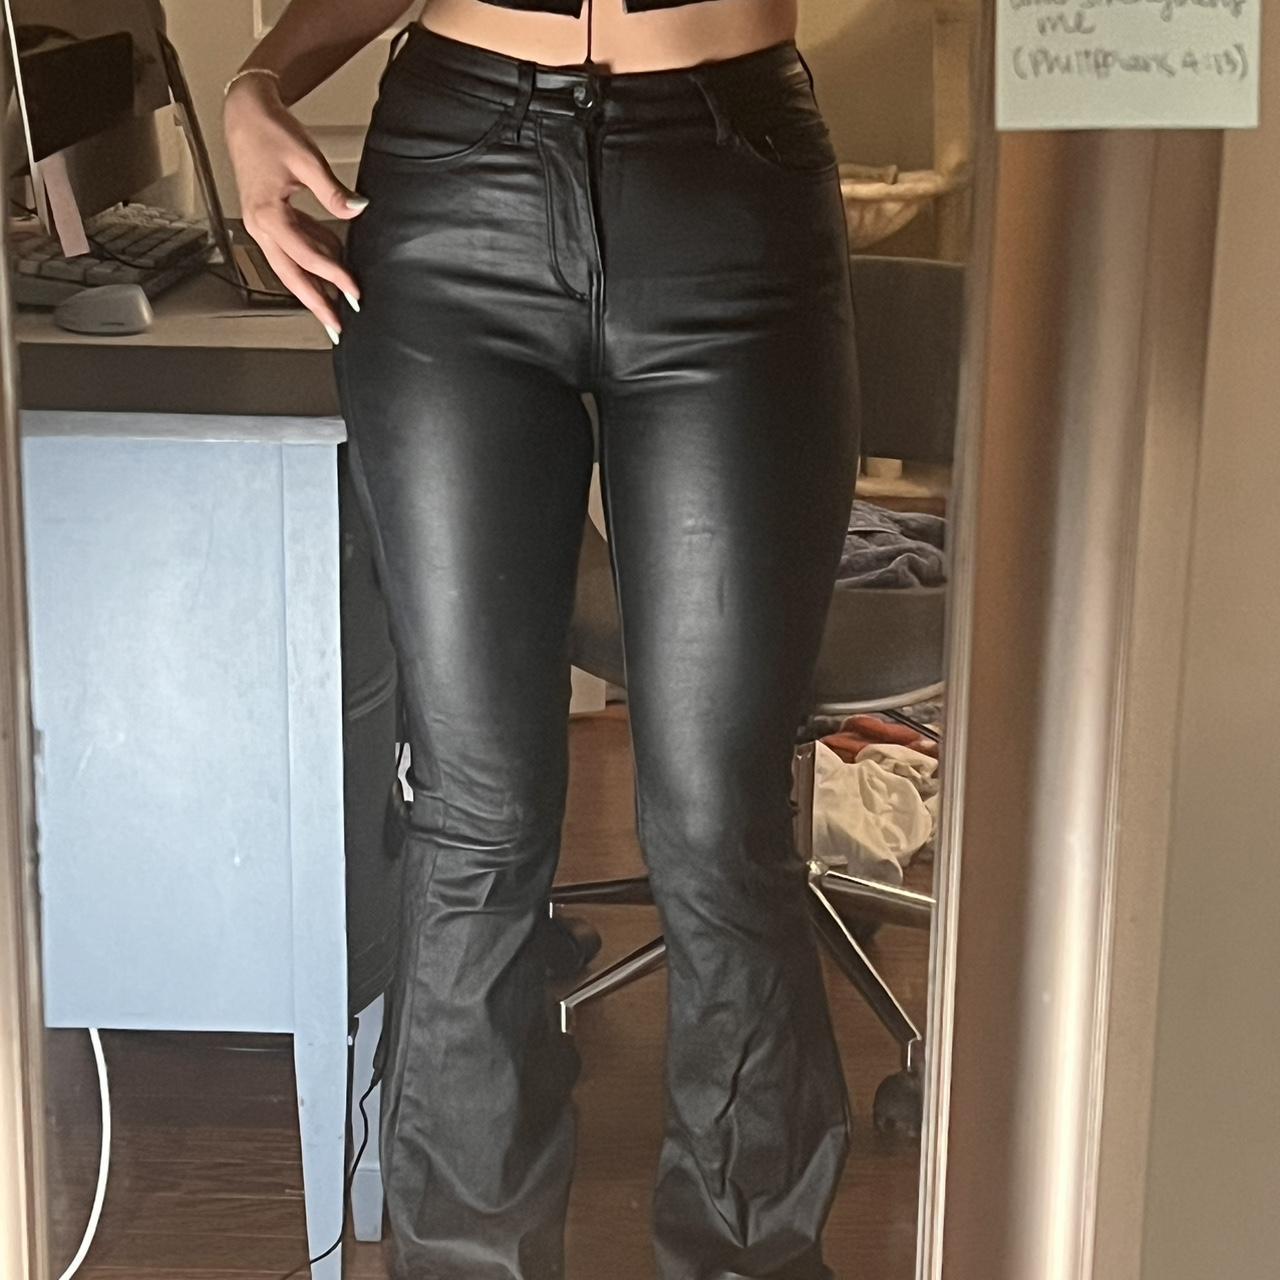 Edikted leather pants - perfect for going out! These... - Depop